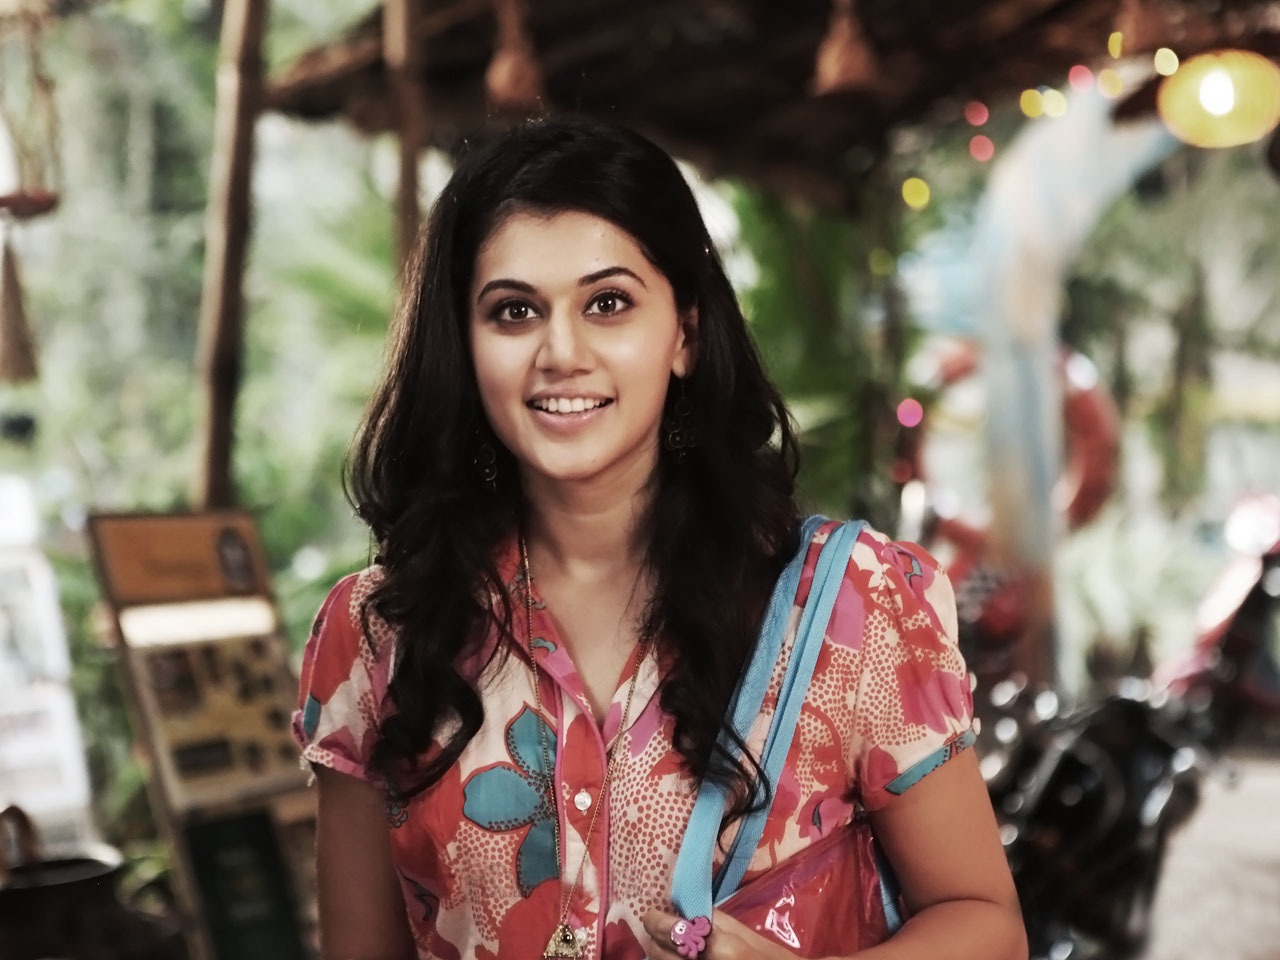 Tapsee Pannu HD Wallpapers